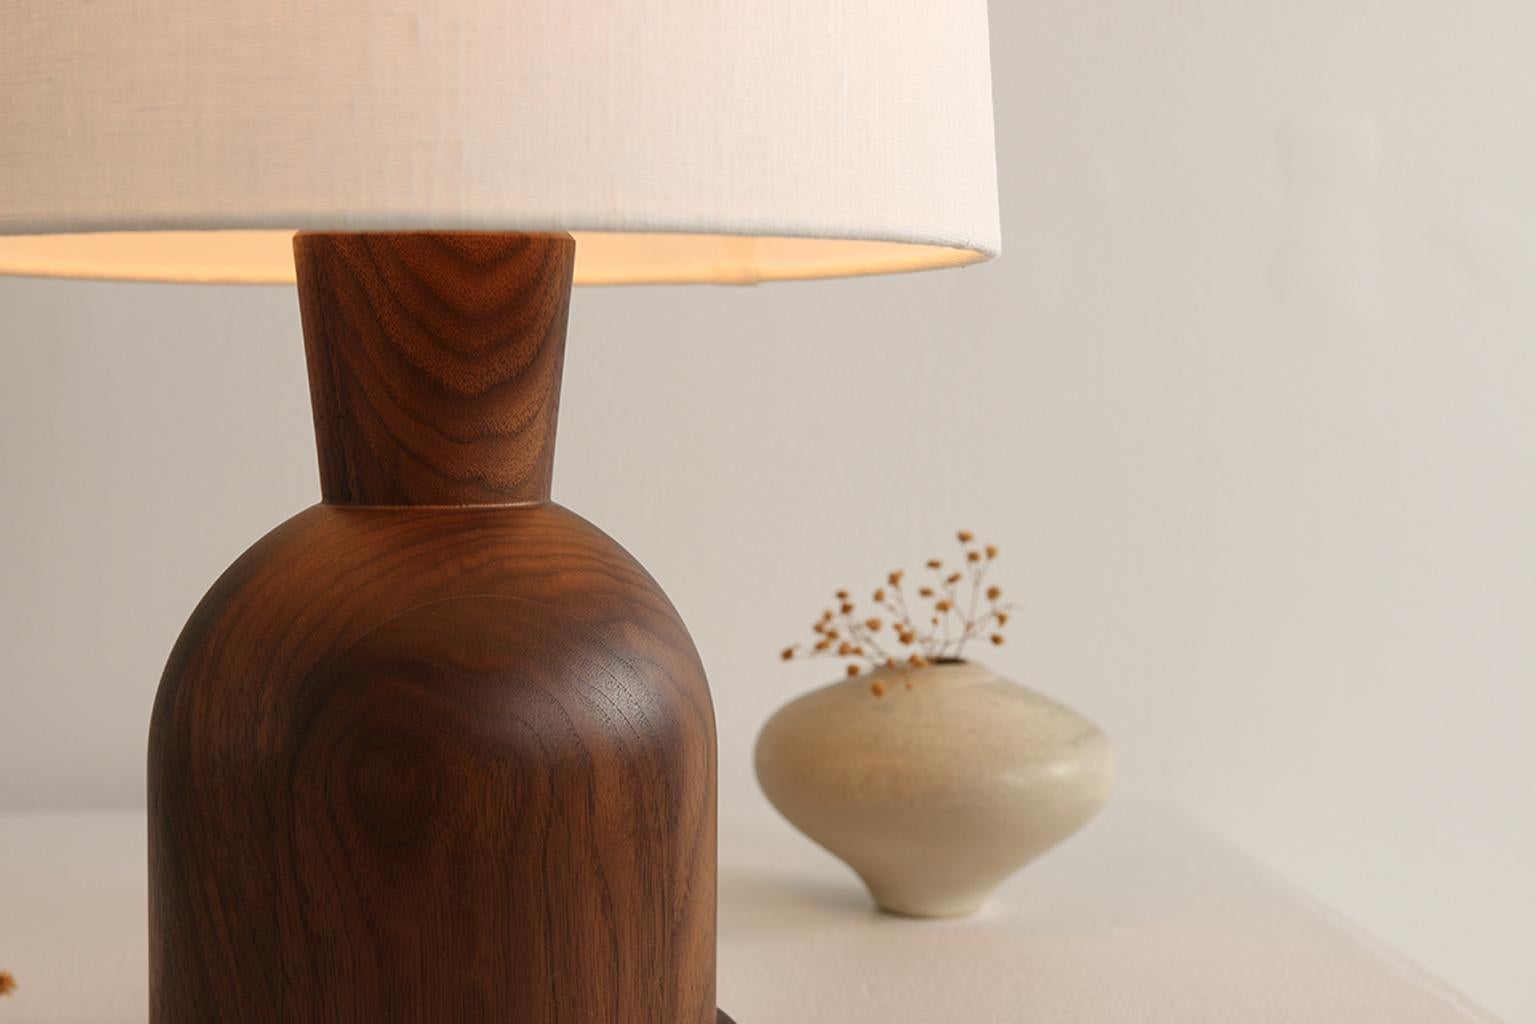 American Beacon Small Table Lamp with Walnut Body and Linen Shade by Studio Dunn